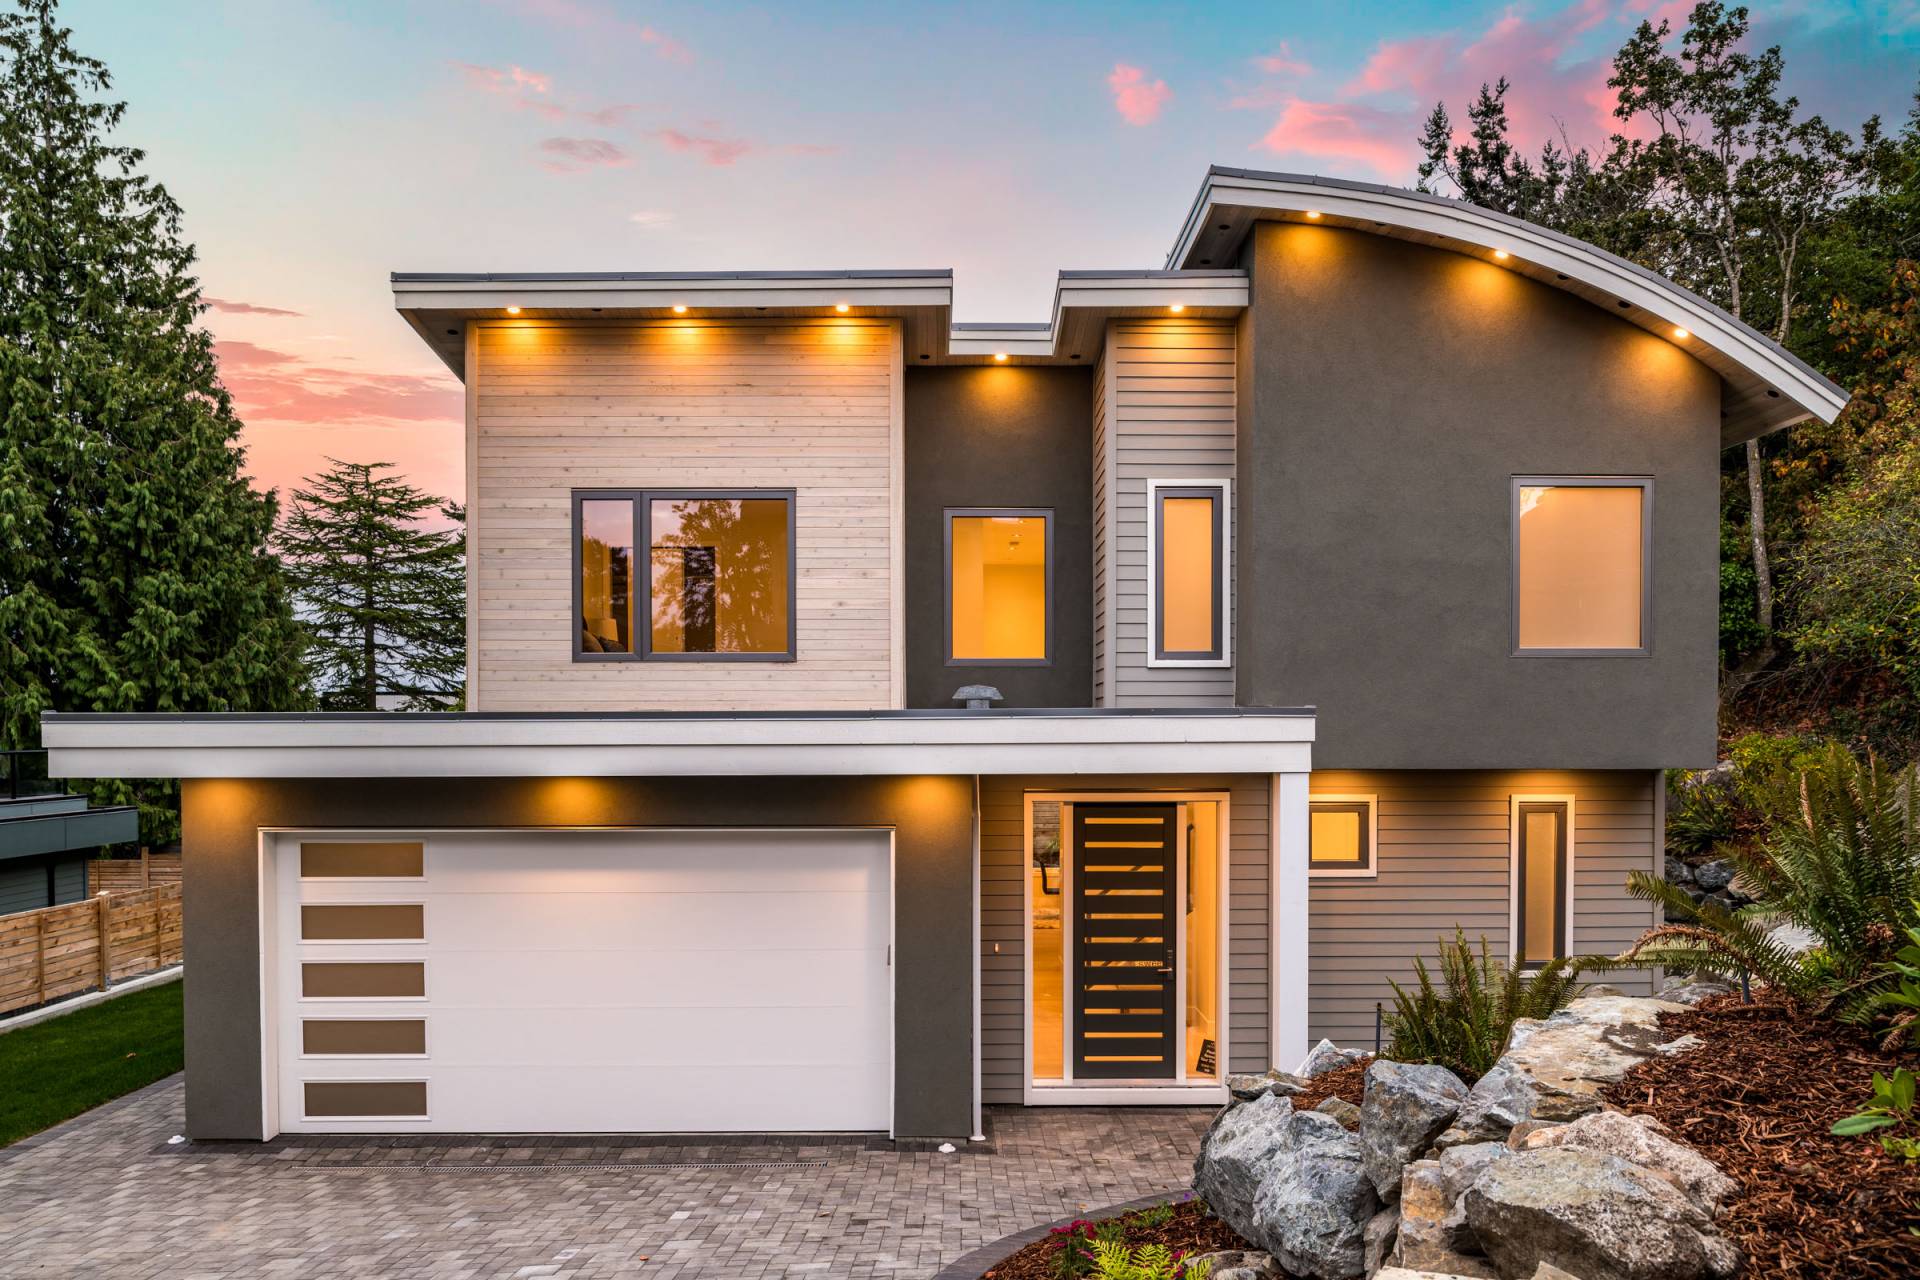 Third Custom Home at Moss Rock by Thistle Construction Victoria BC